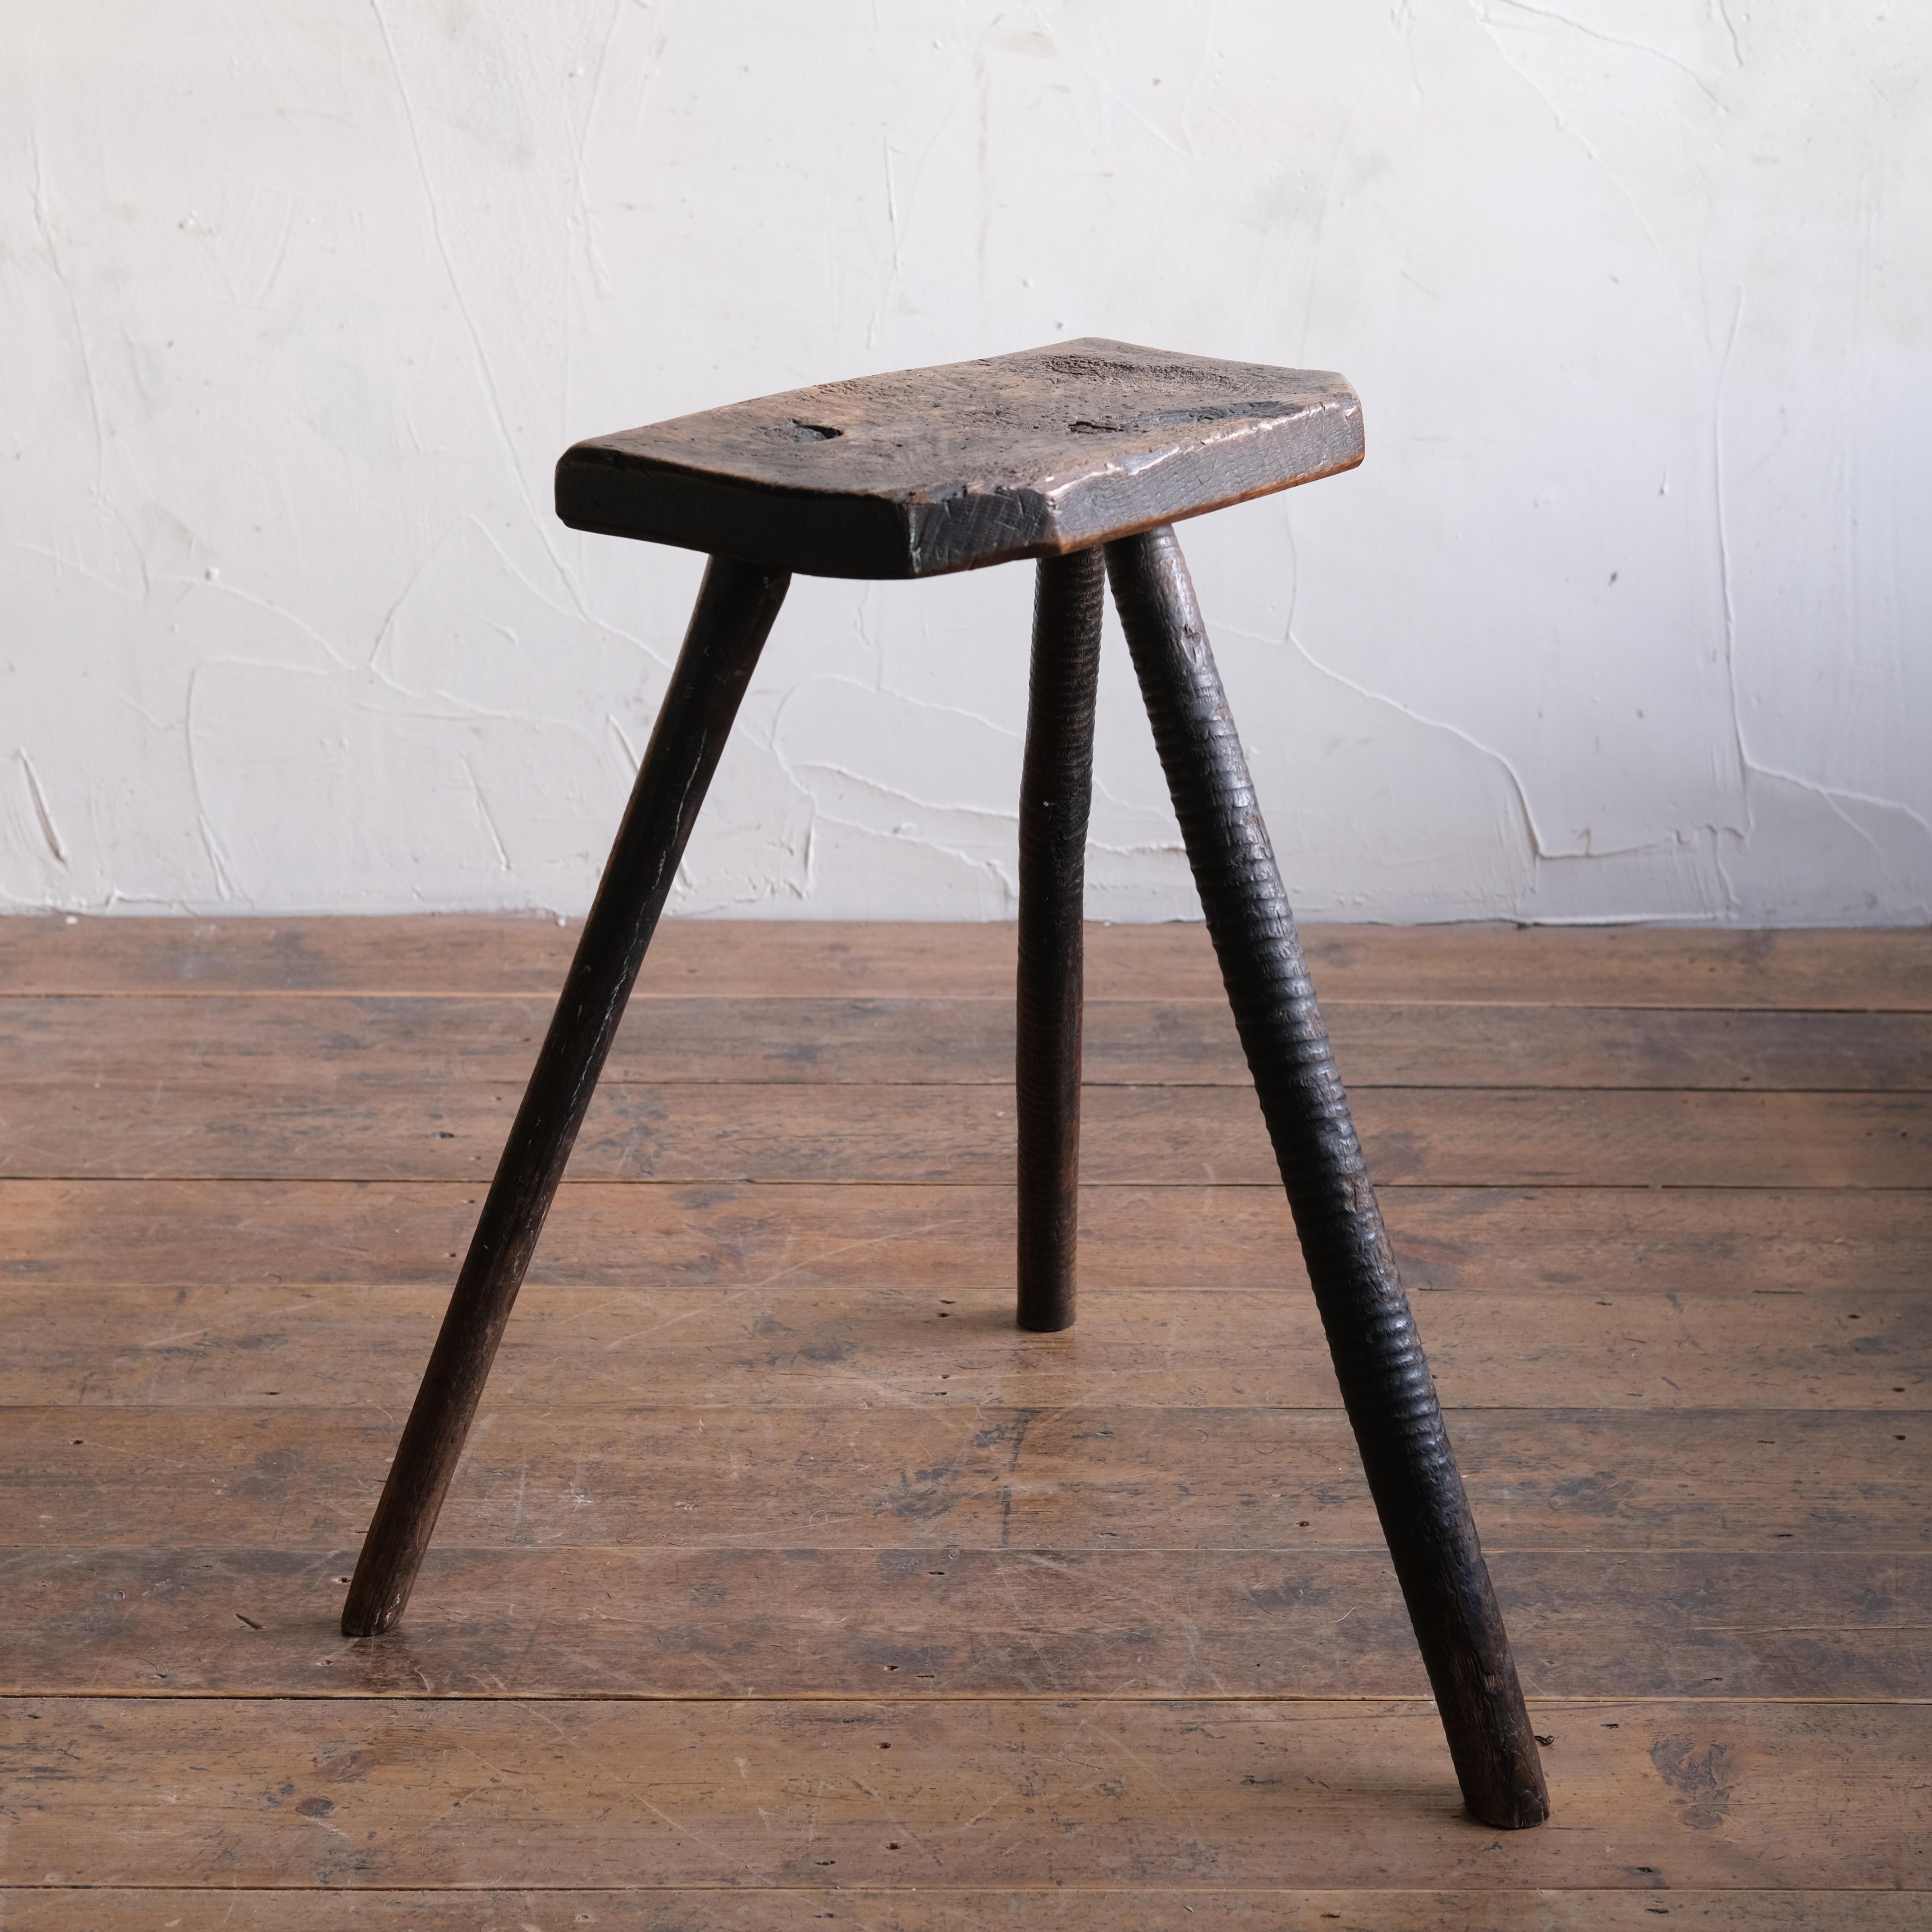 A 19th century cutlers stool. The ring turned legs are we specific to Sheffield where the cutlery industry was huge due to its output of steel. It appears the stool has had a leg replaced which does seem to be period and I think it shows that this